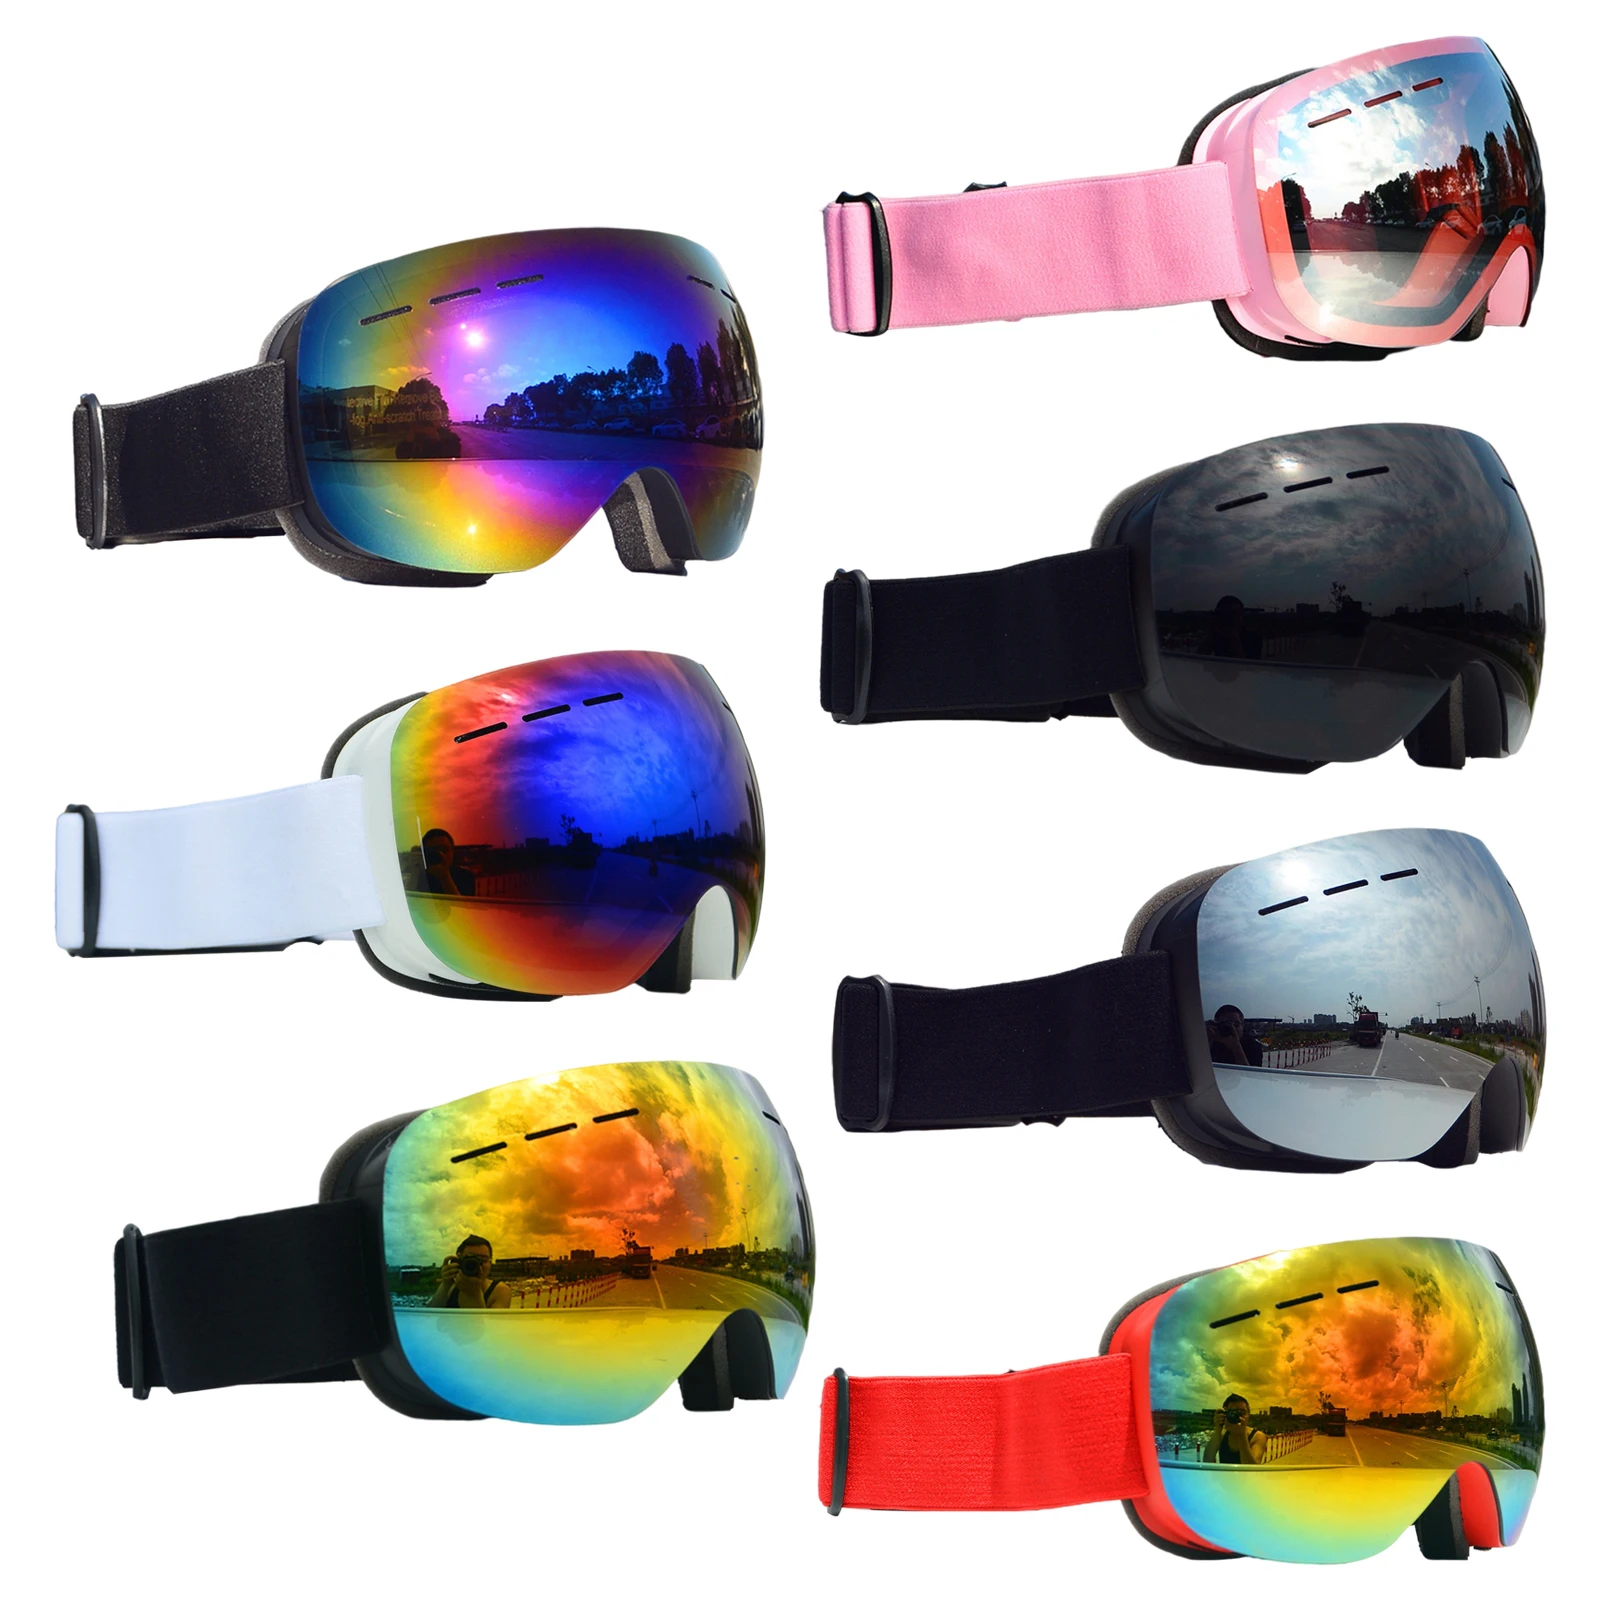 Skis ScratchPremium  Snow WindDustGlasses for Snowmobil Skiing Motorcycle Grunge Bike Motocross Youth